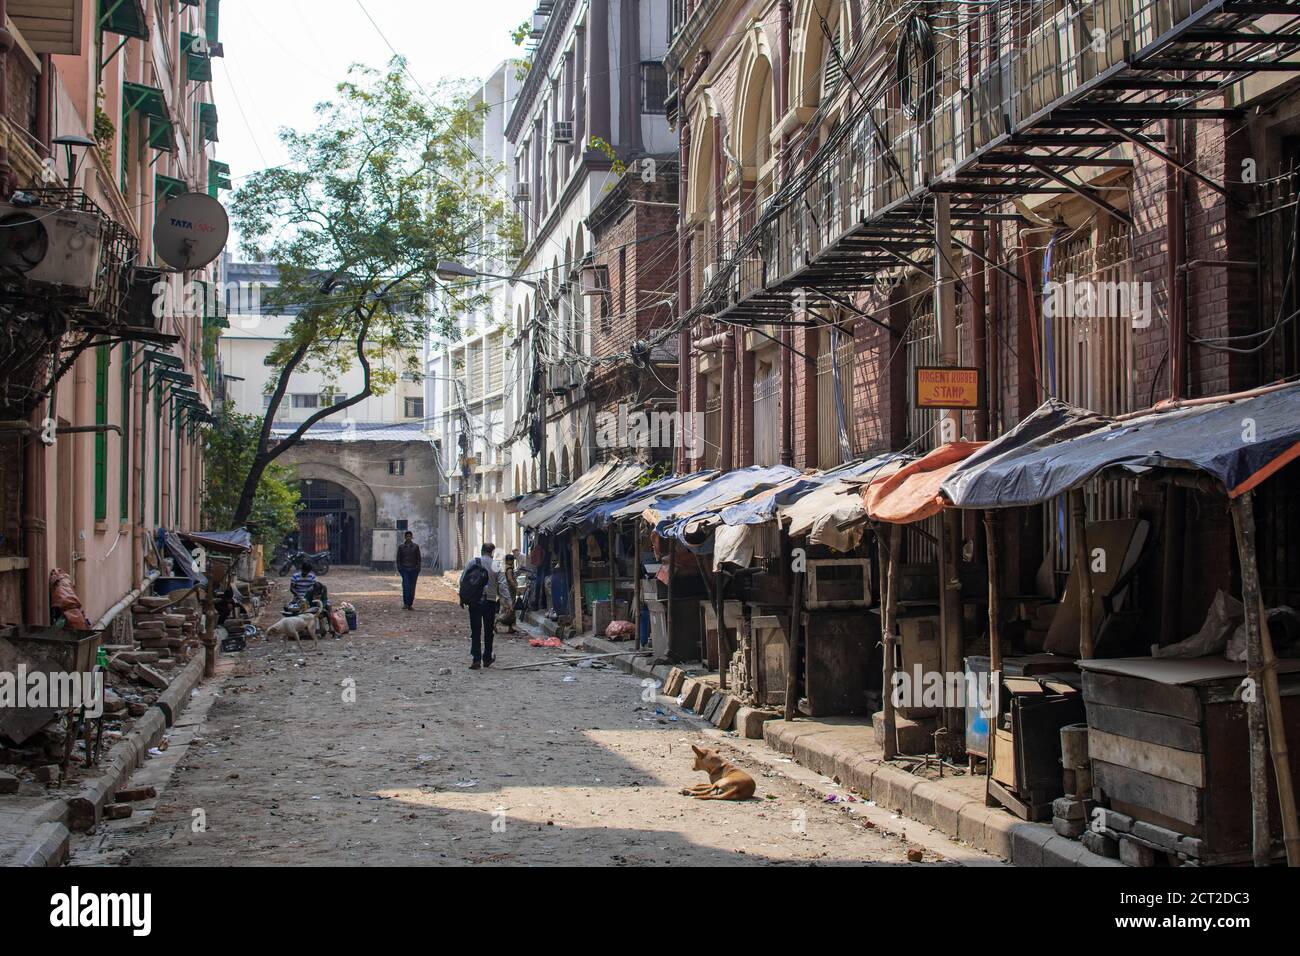 Kolkata, India - February 1, 2020: A few unidentified people in a local alleyway with closed market stalls with tarps on February 1, 2020 in Kolkata Stock Photo